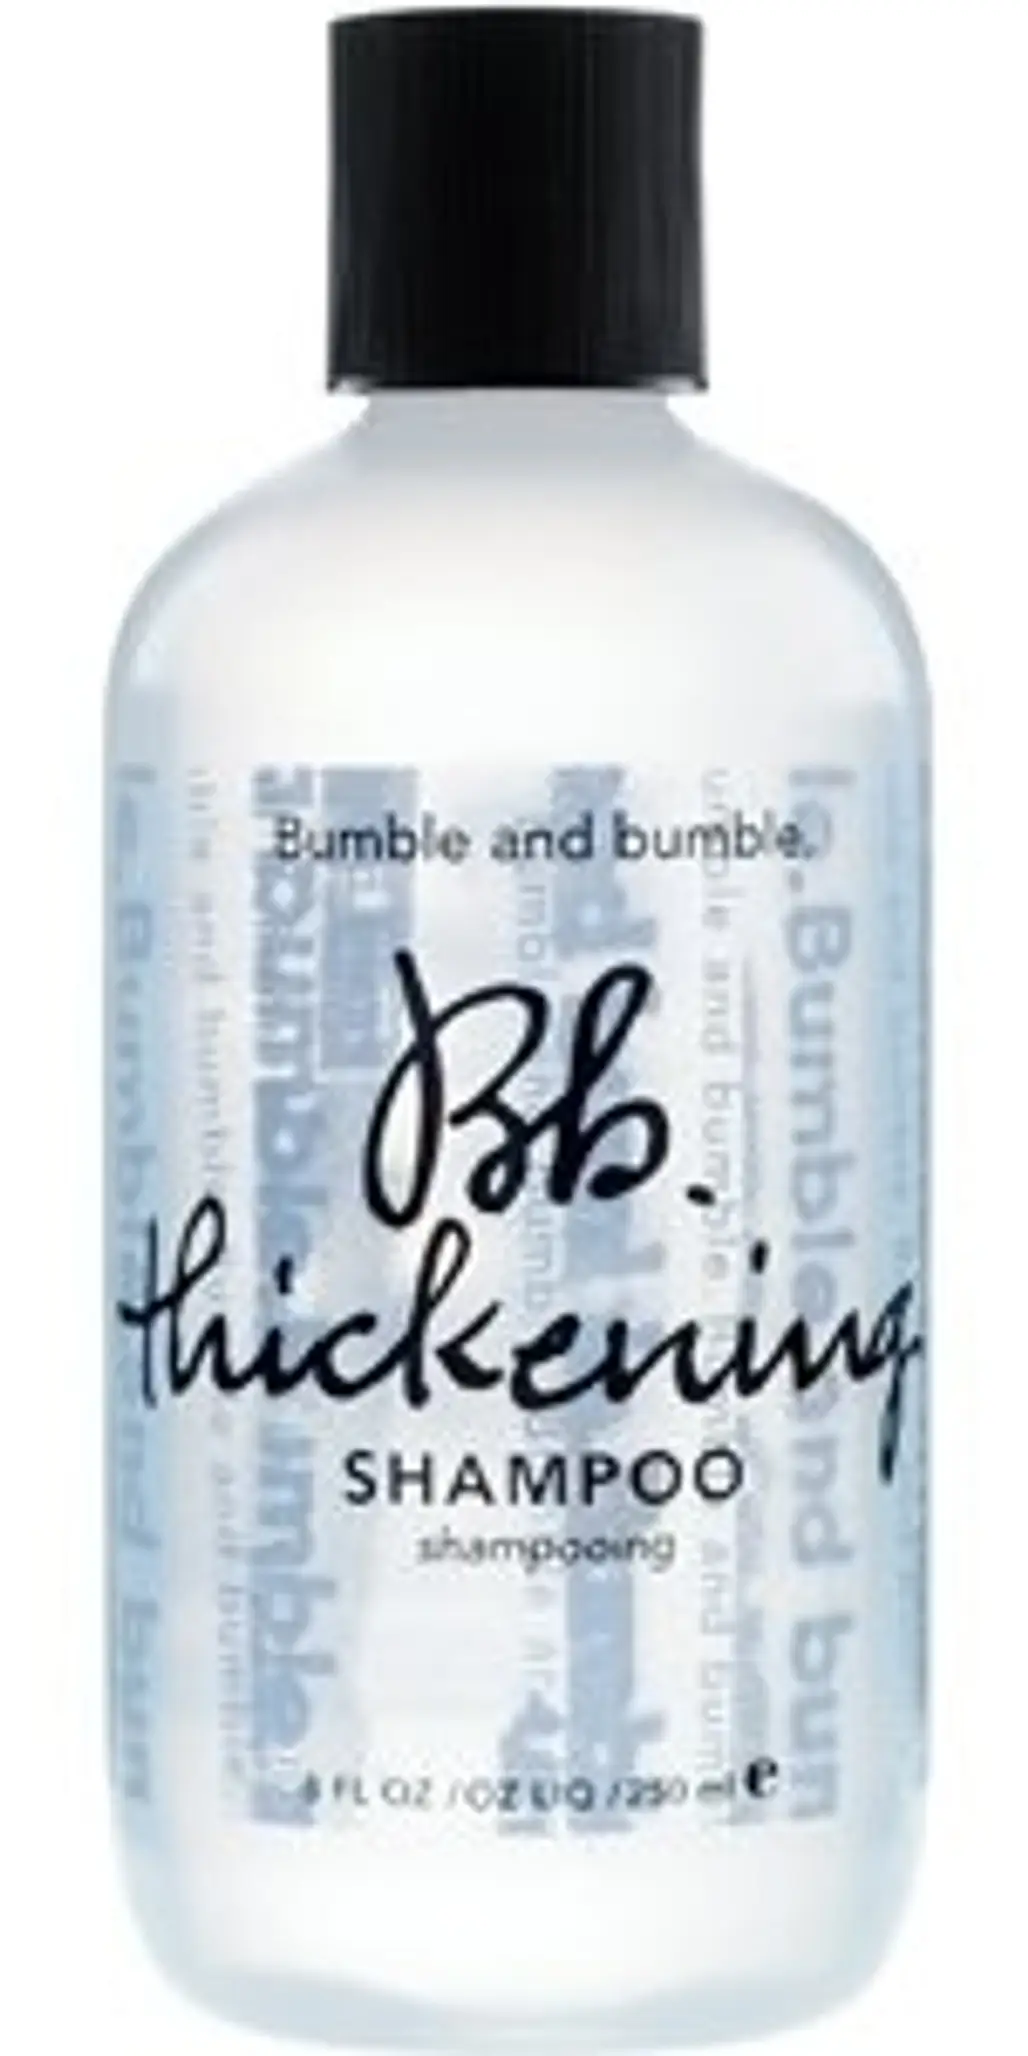 Bumble and Bumble Thickening Shampoo and Conditioner